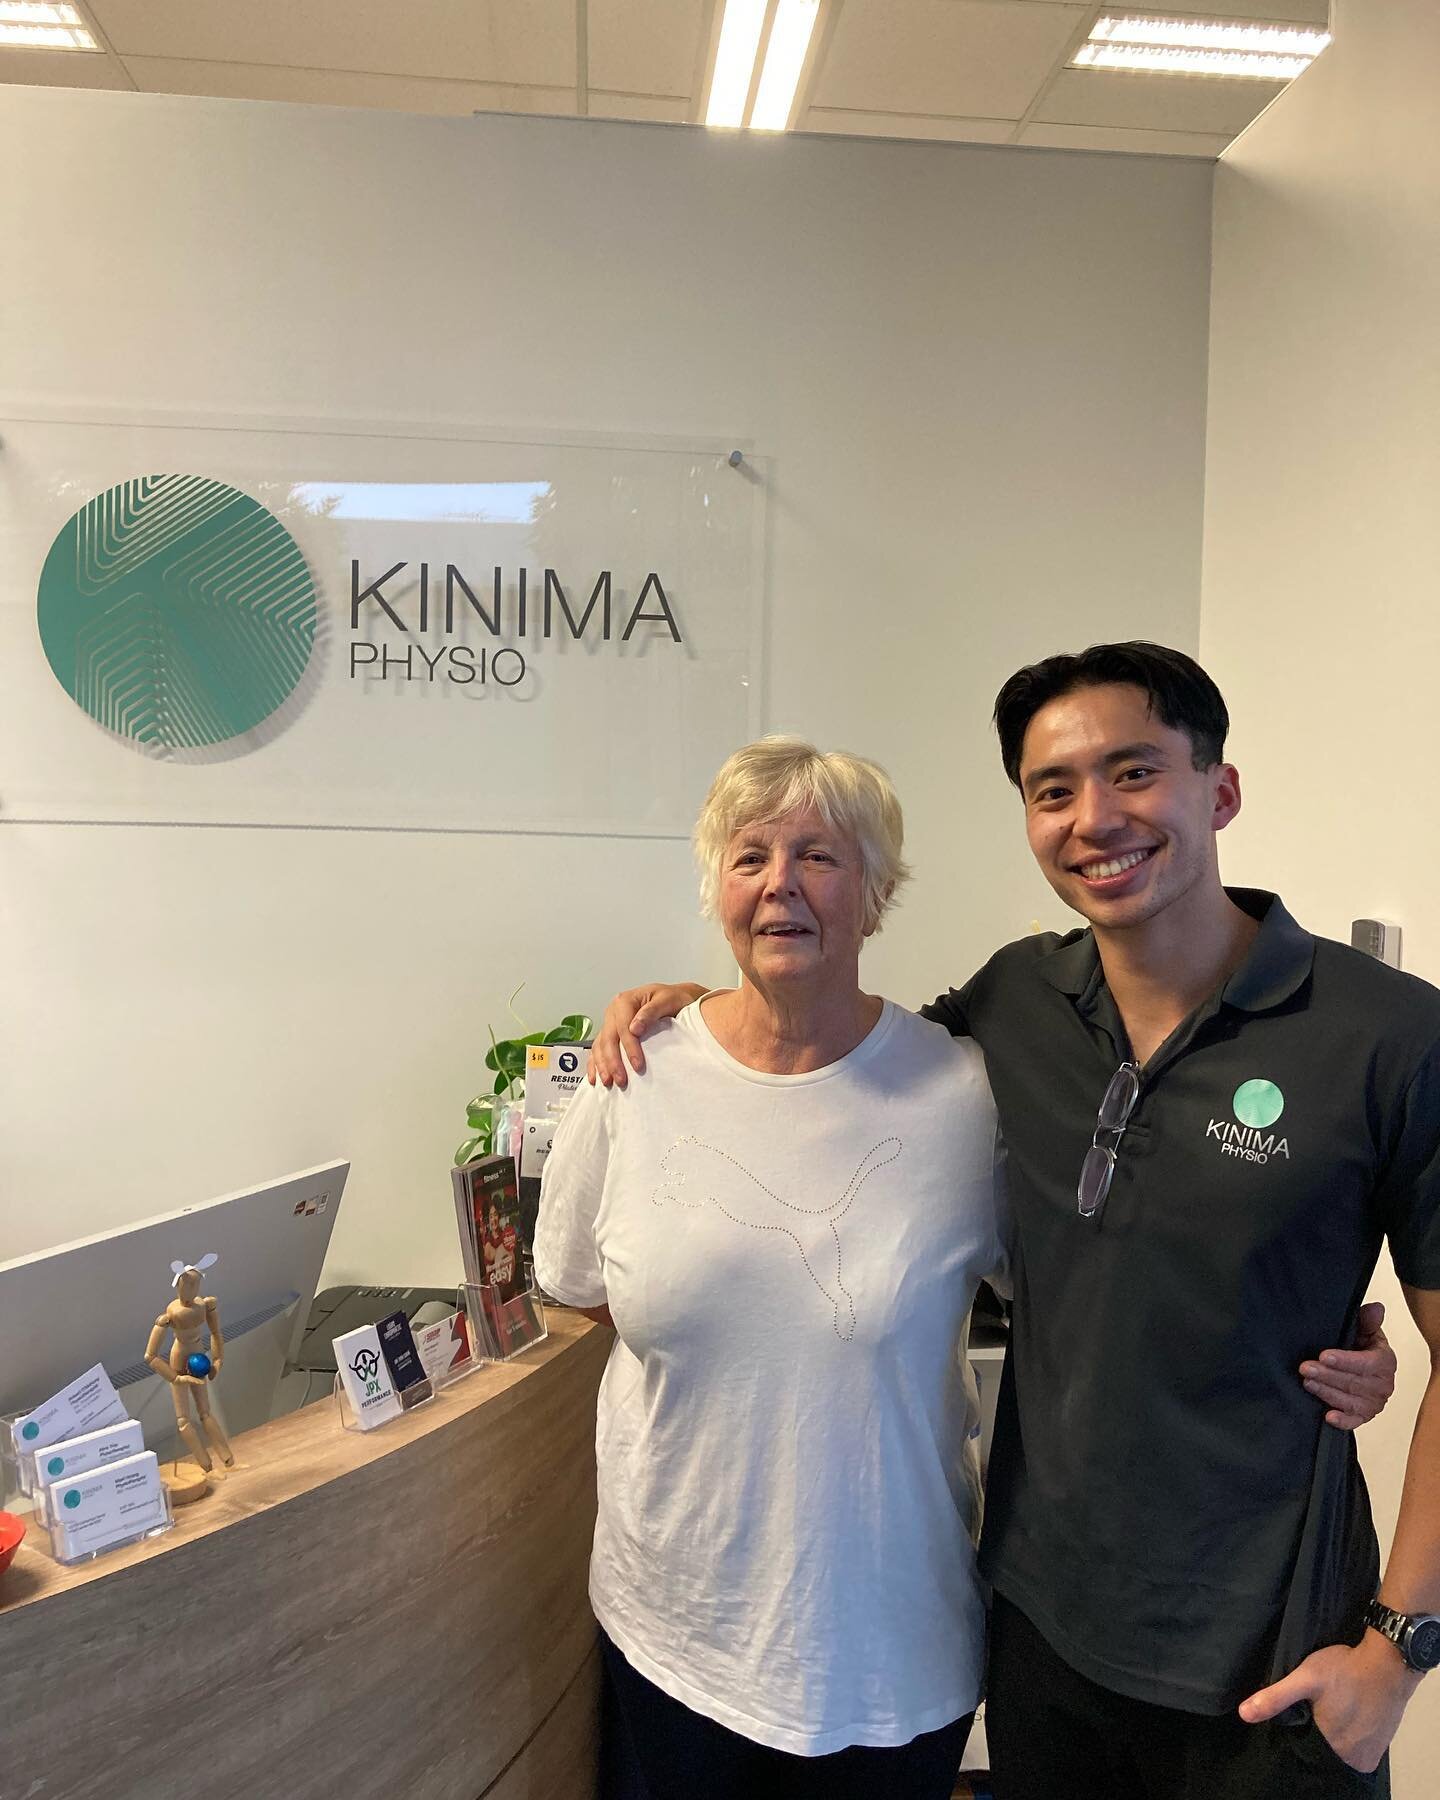 𝐌𝐞𝐞𝐭 𝐊𝐢𝐦!
Kim comes in once a week for our exercises classes that involves gym and pilates training. She brings in lots of positive energy and laughs to each session (most jokes are made at Marks expense 😂).

One of her goals was to do a sing